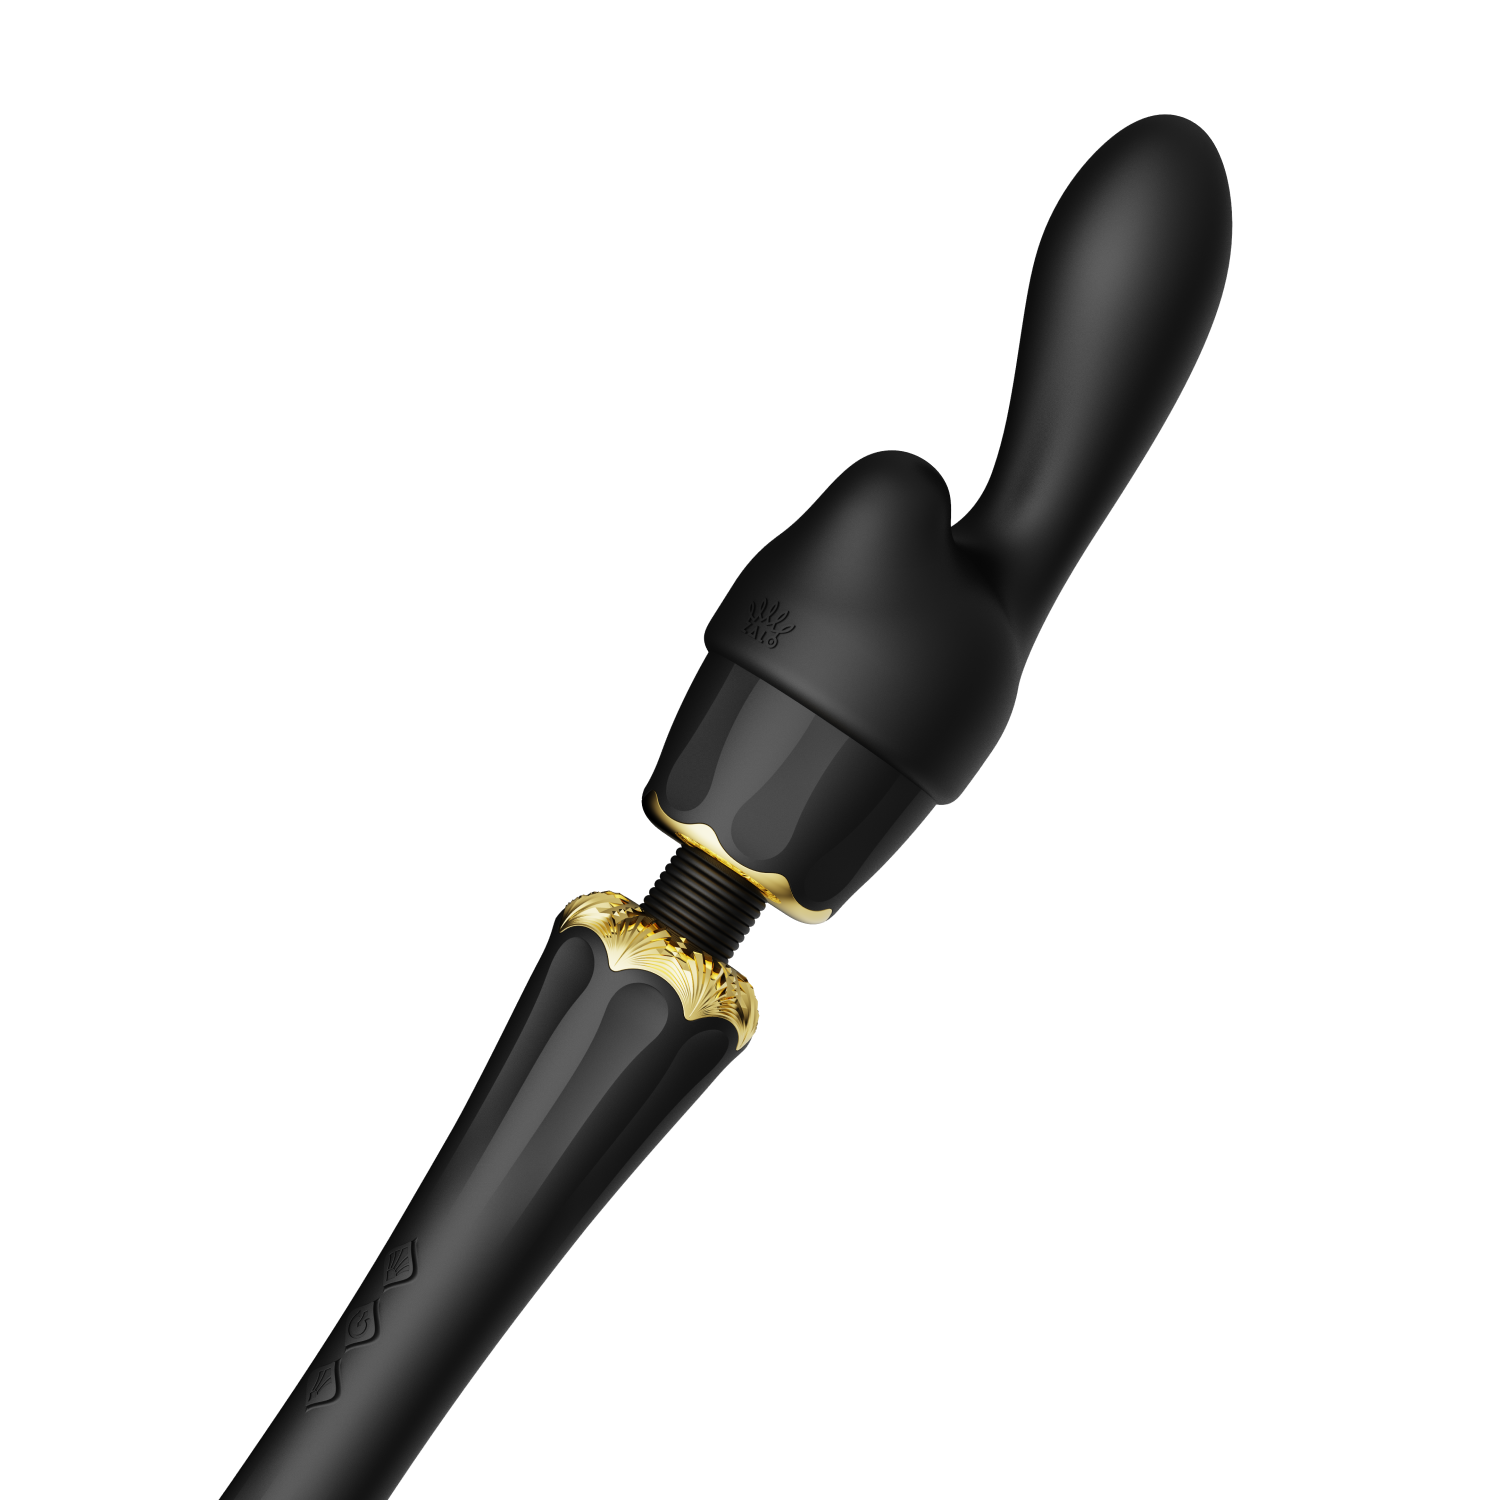 Black wand with g-spot attachment on top